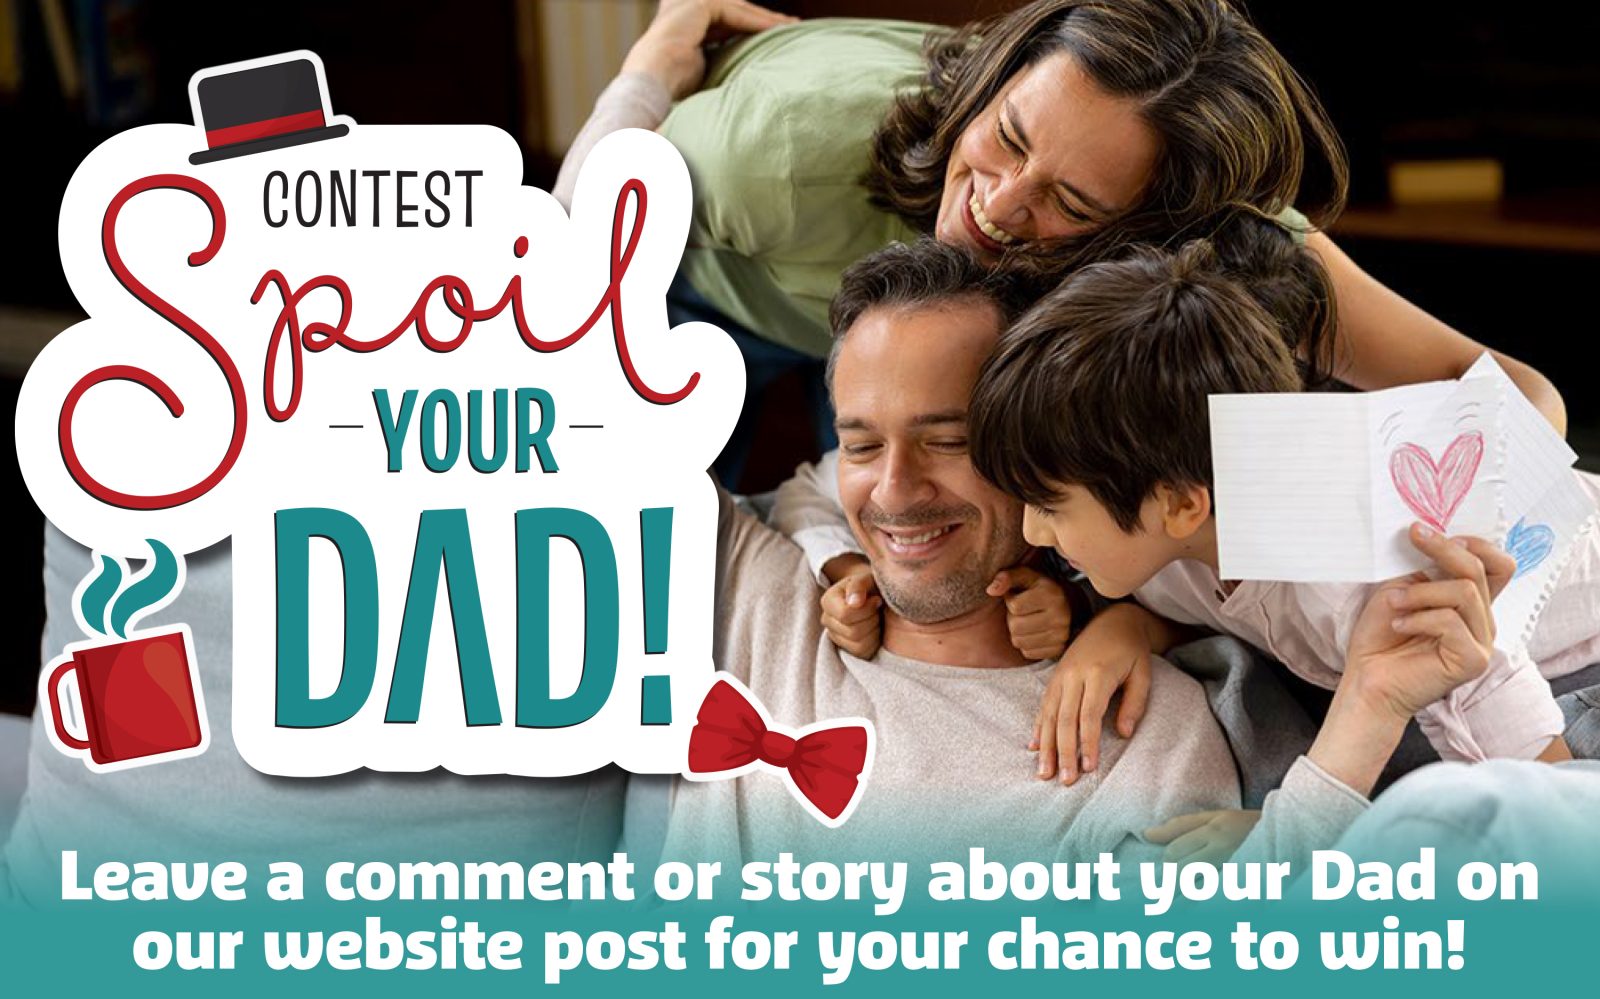 Spoil Your Dad Contest